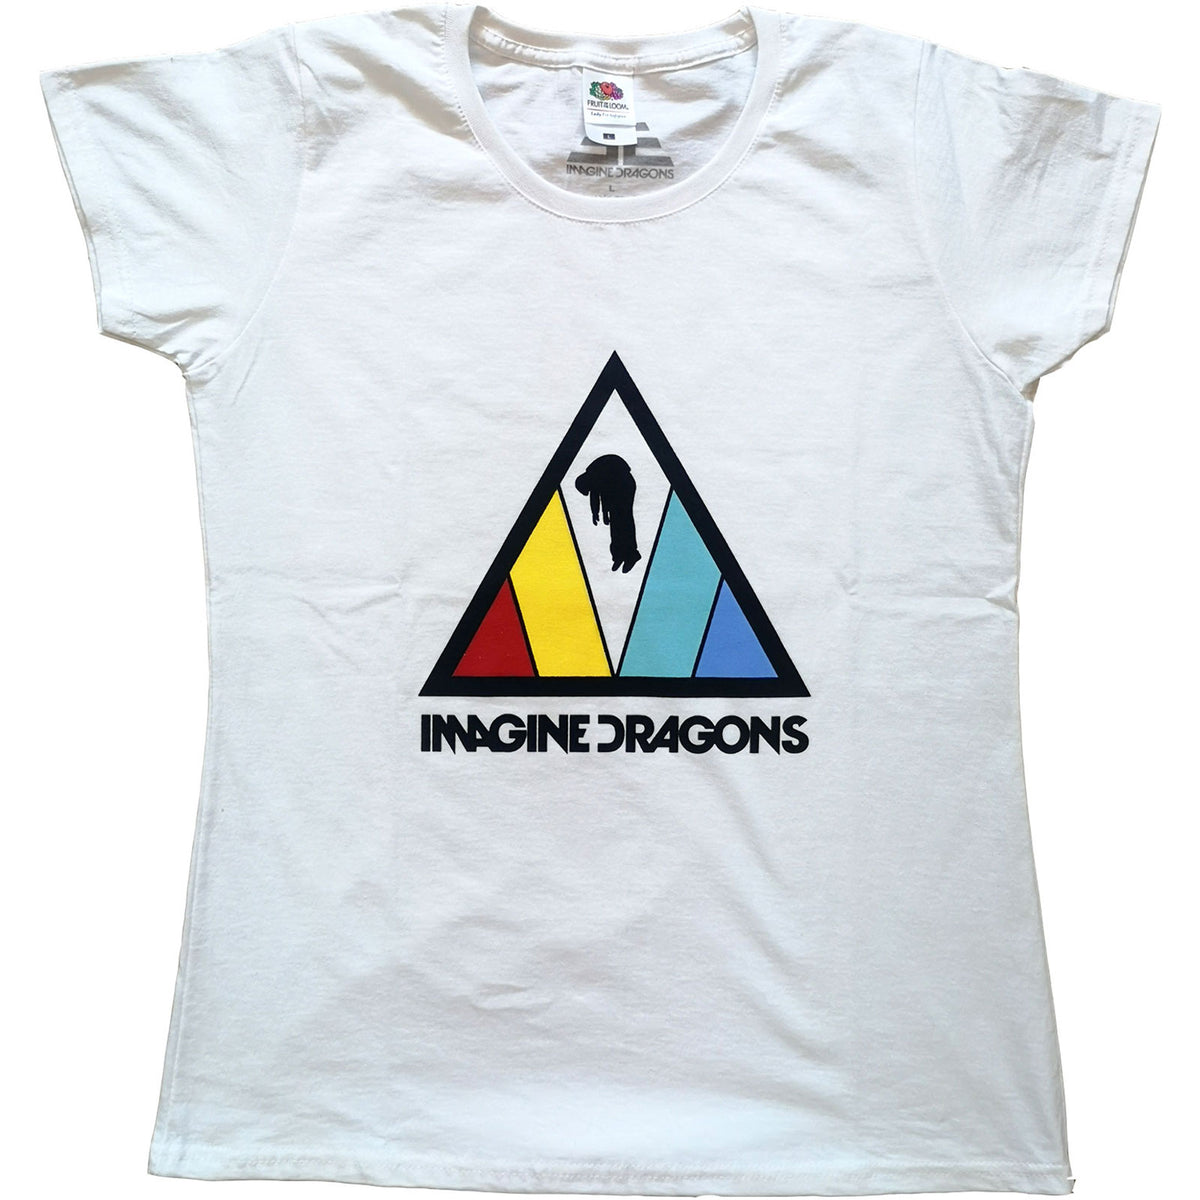 Imagine Dragons Ladyfit T-Shirt - Triangle Logo - Official Licensed Product